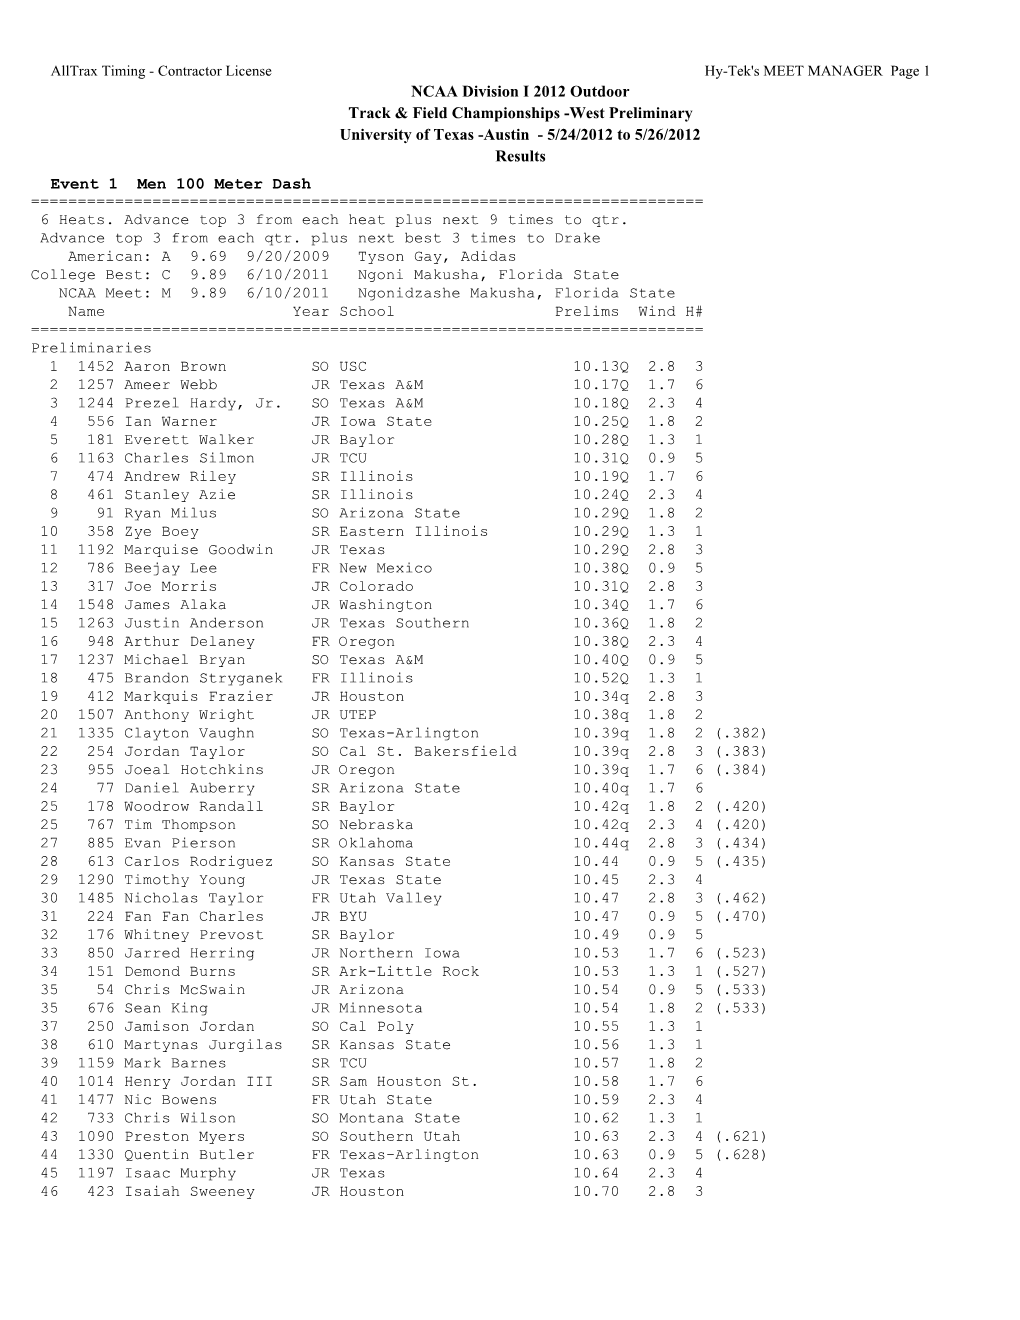 West Preliminary University of Texas -Austin - 5/24/2012 to 5/26/2012 Results Event 1 Men 100 Meter Dash ======6 Heats